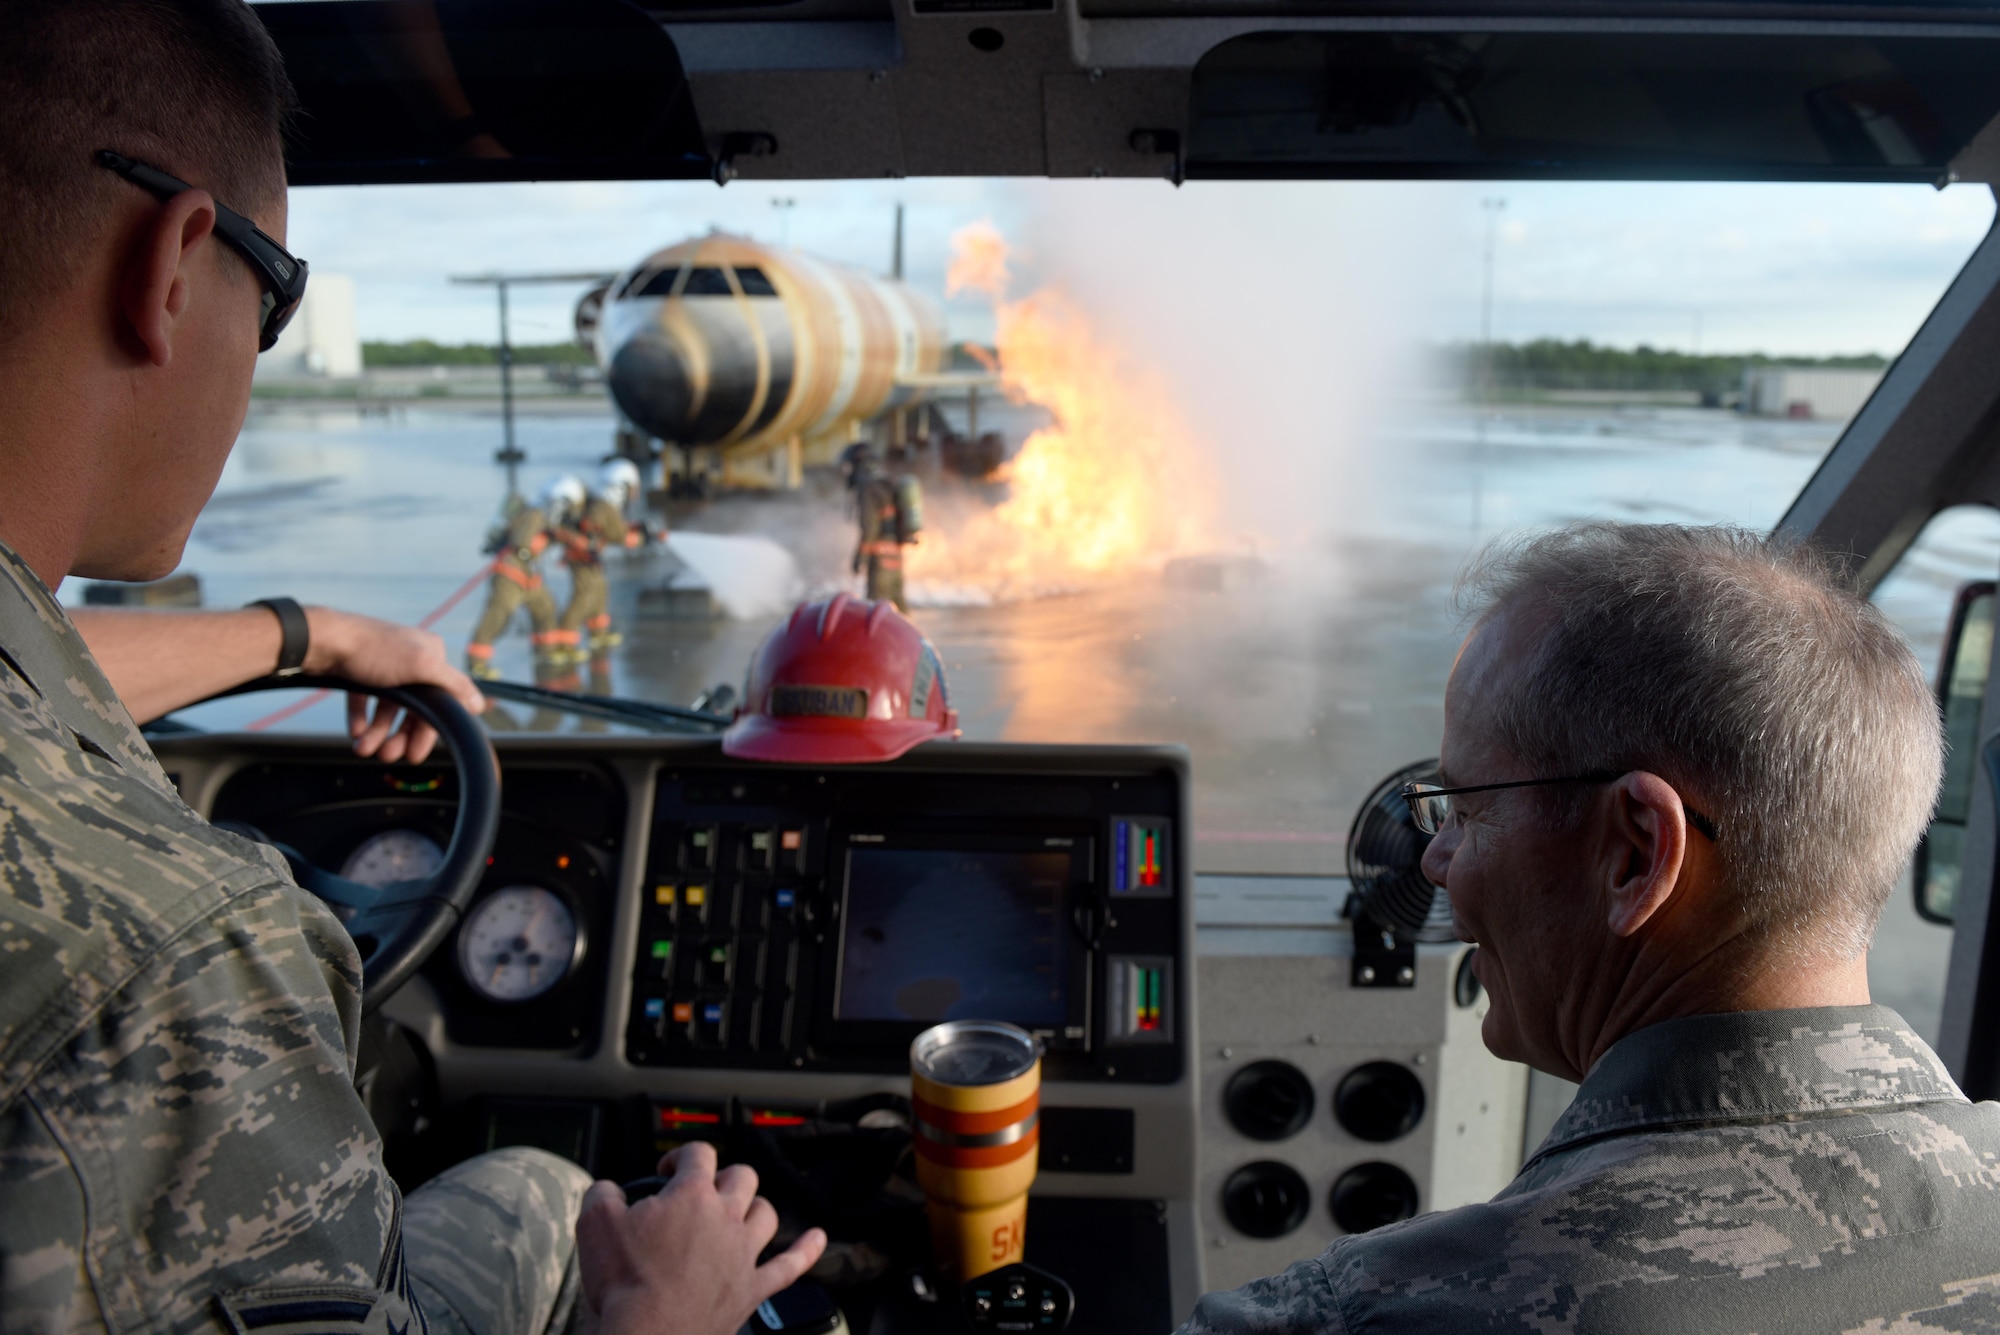 U.S. Air Force Staff Sgt. Michael Skuban, 312th Training Squadron instructor, shows Maj. Gen. Bob LaBrutta, 2nd Air Force Commander, how to use the water cannon on a fire truck at the Louis F. Garland Department of Defense Fire Academy on Goodfellow Air Force Base, Texas, Oct. 6, 2016. LaBrutta visited the training squadrons during his two-day tour of the base. (U.S. Air Force photo by Airman 1st Class Chase Sousa/Released)